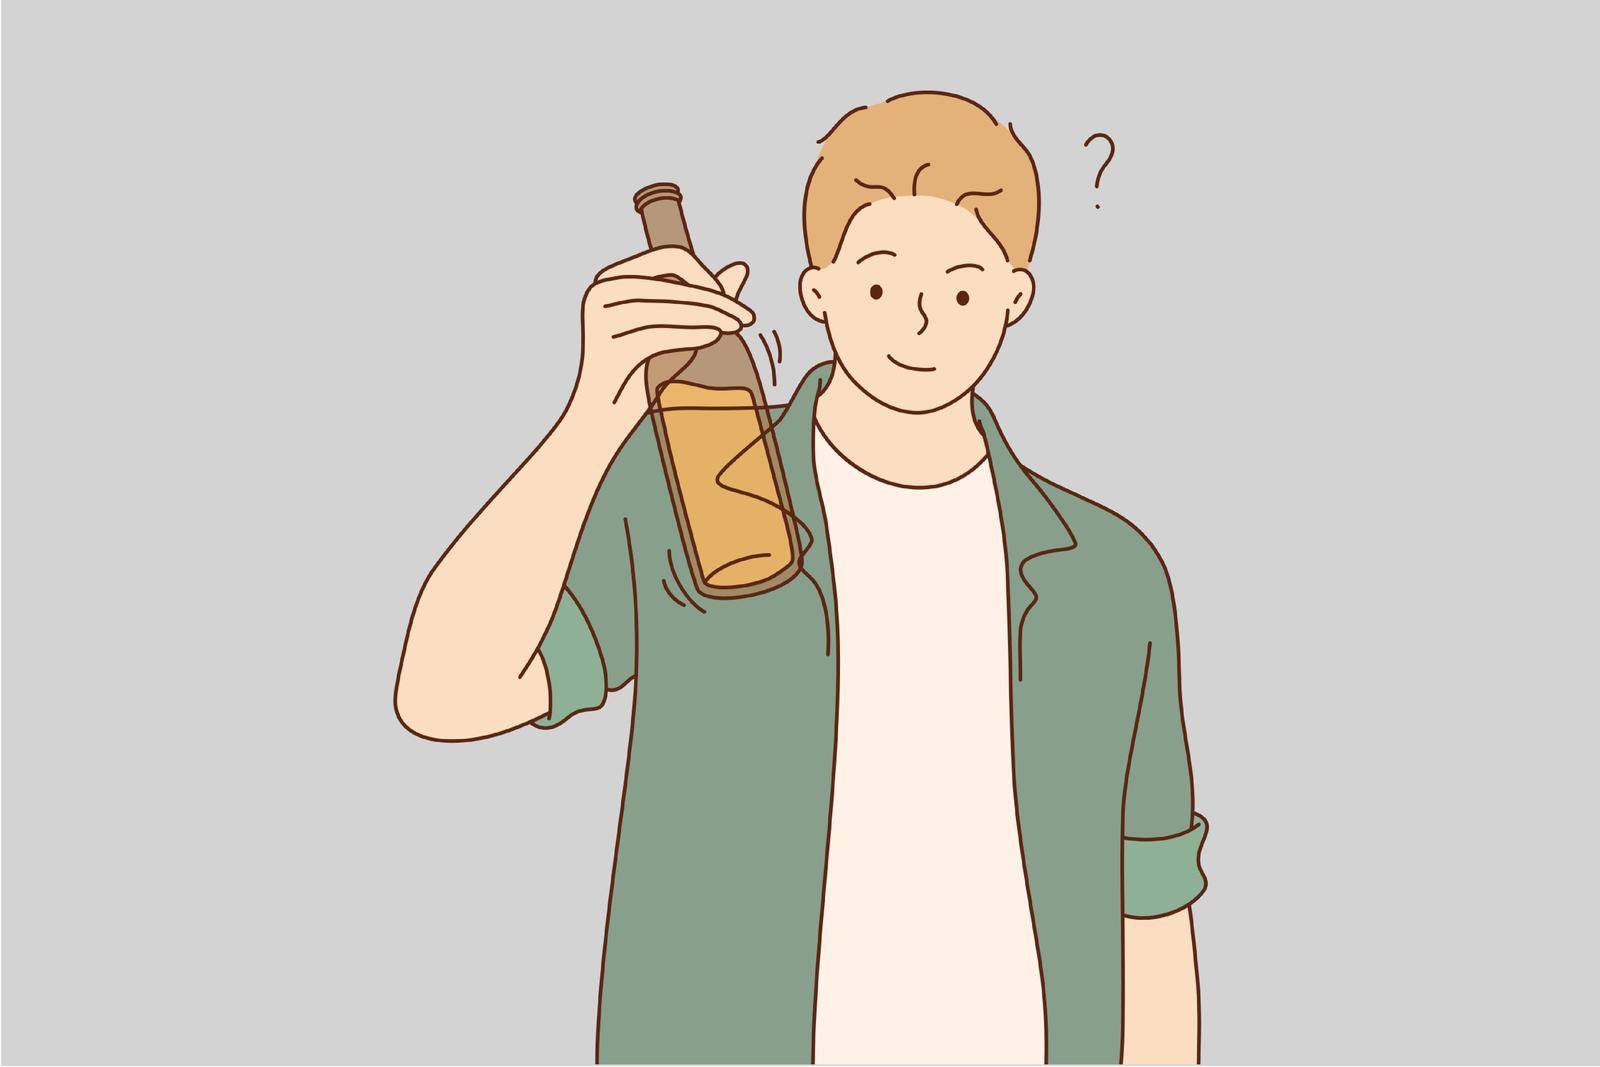 Drink, alcohol, celebration, congratulation concept. Young happy smiling man guy boy alcoholic holding bottle of beer and raising toast. Cheers on party and relaxation beverage addiction illustration